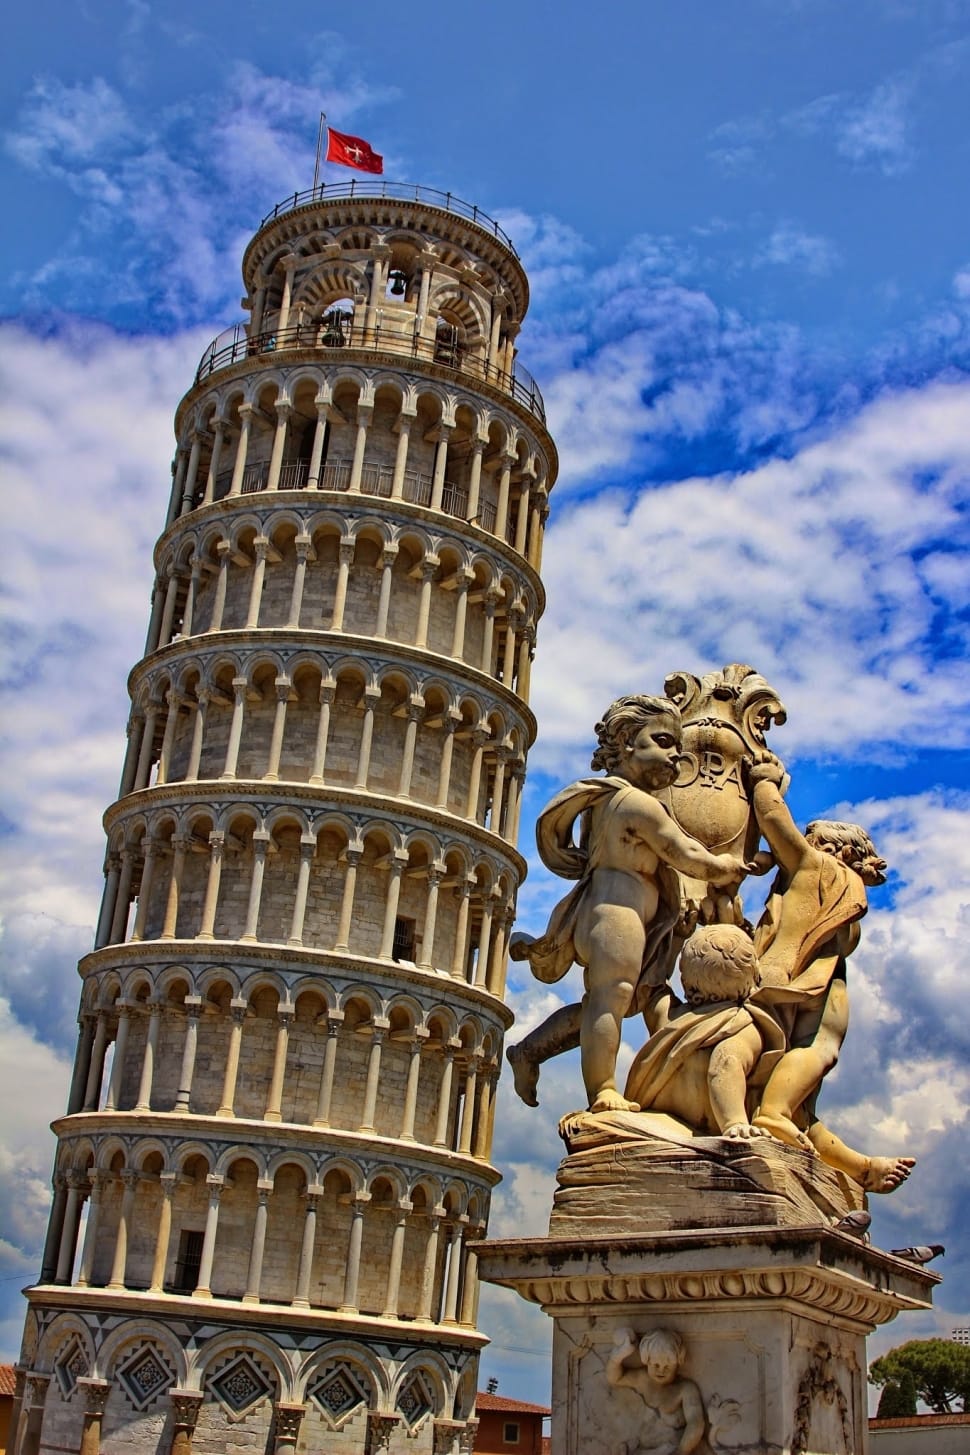 the leaning tower of pi-sat preview